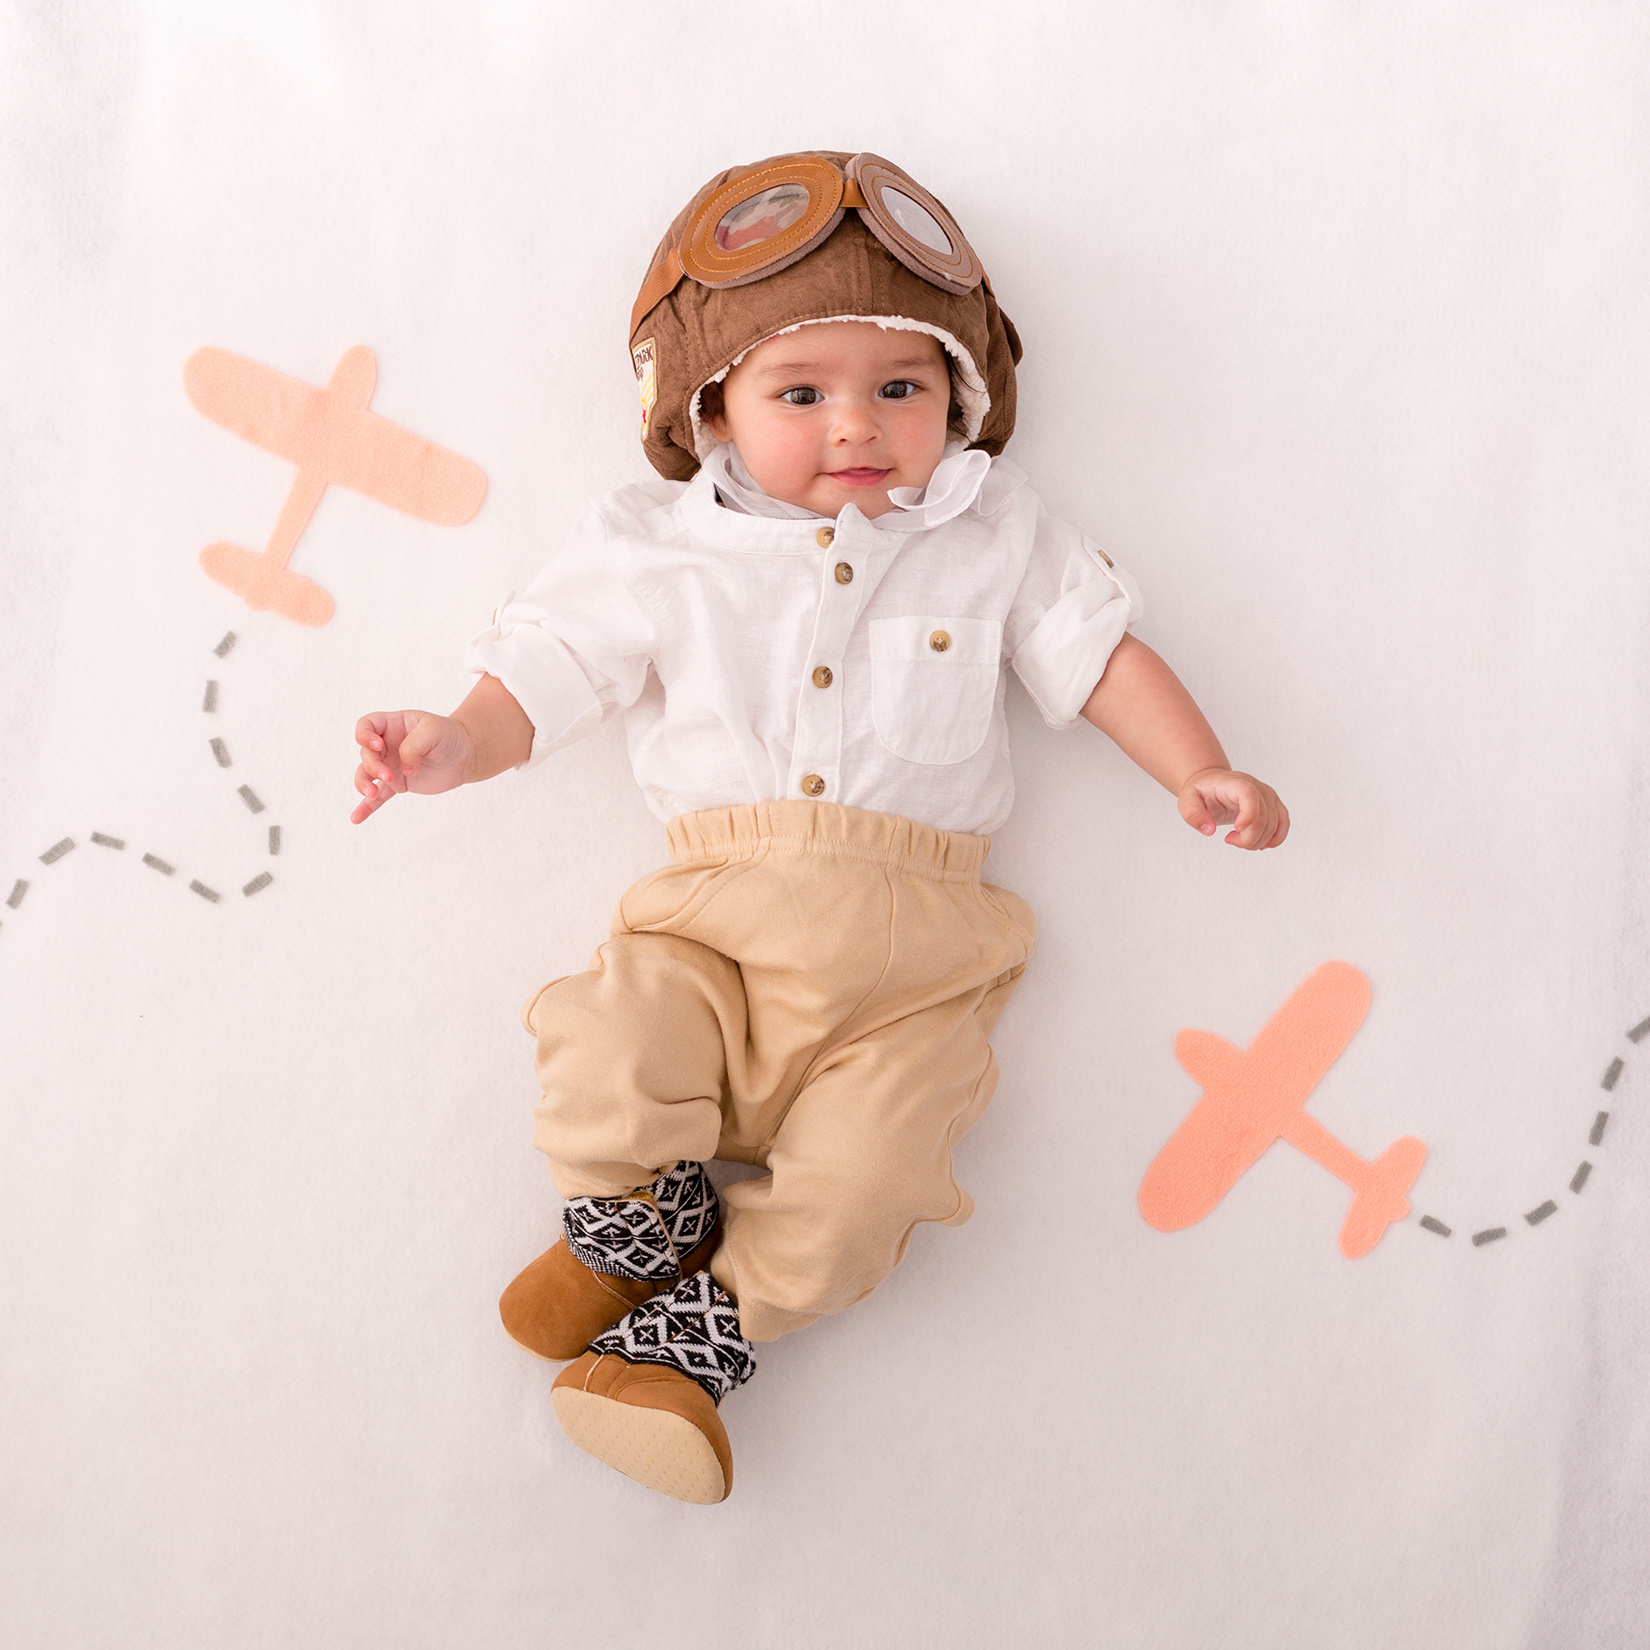 34 Last-Minute DIY Halloween Costume Ideas for Kids image picture